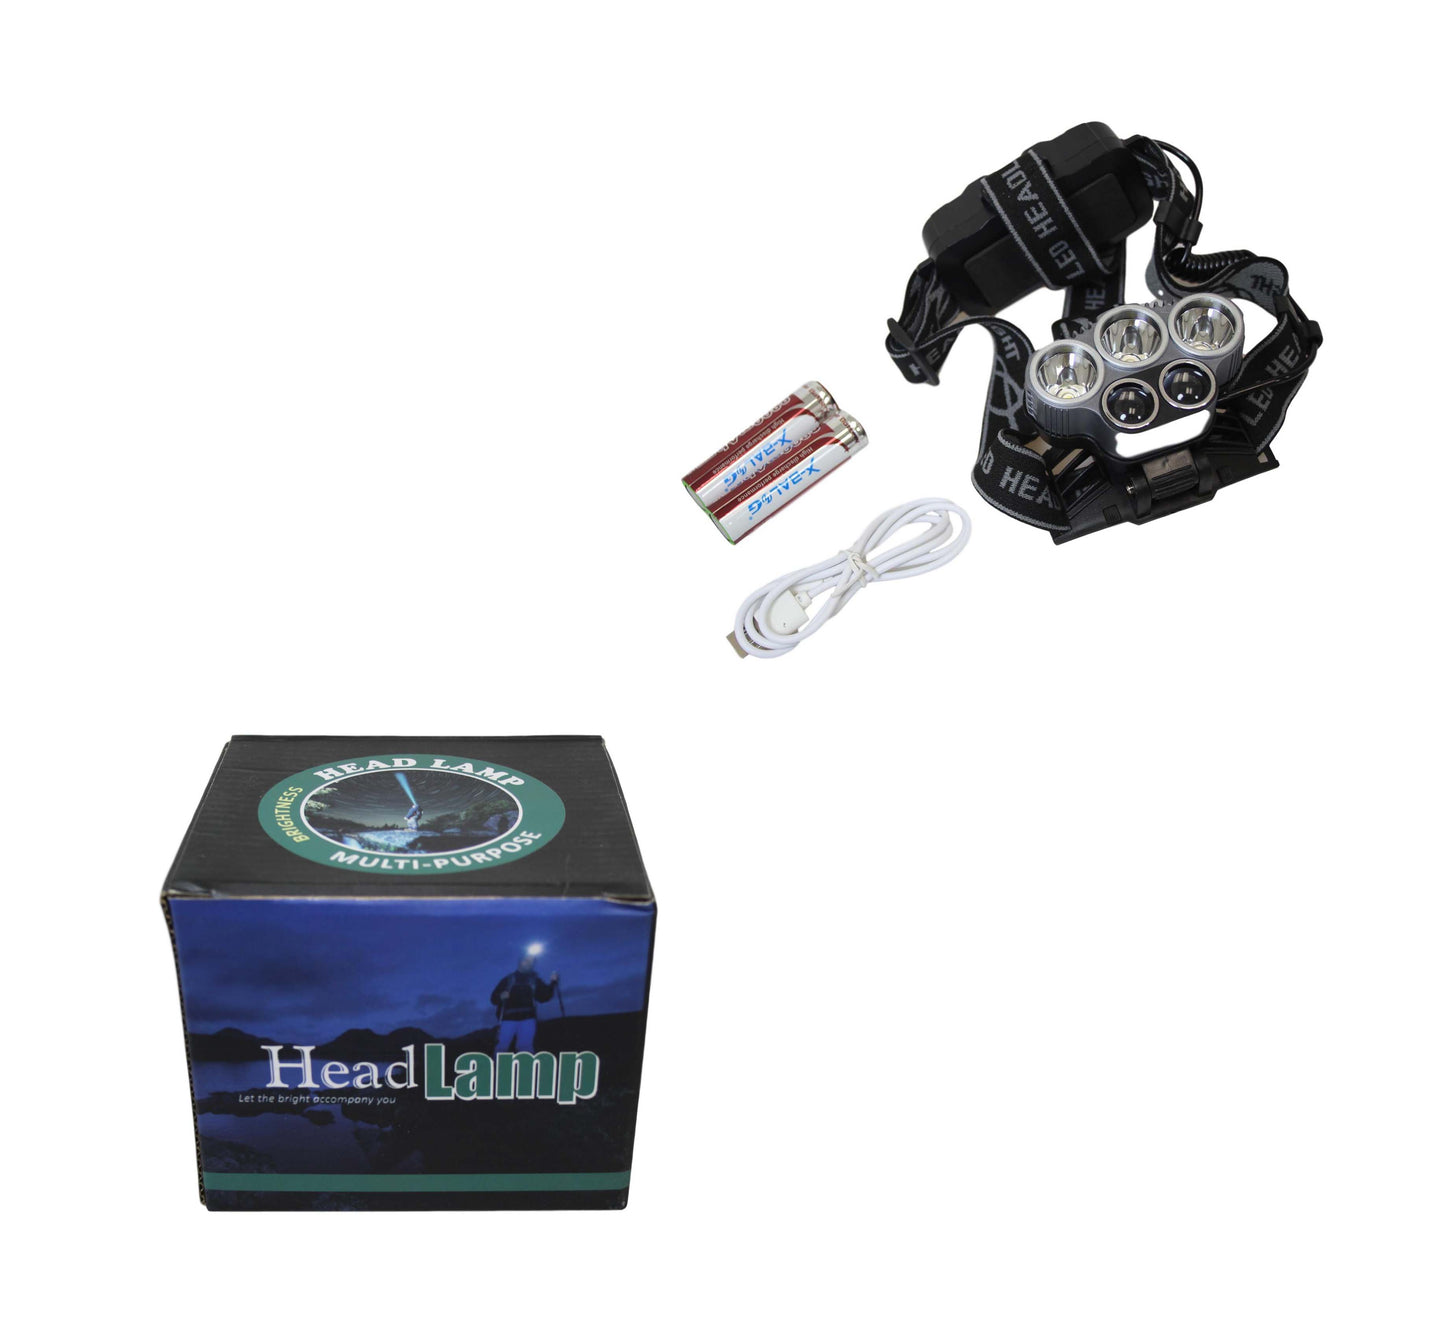 Camping Headlamp Torch Charger And Battery Powered Headlamp 6463 (Parcel Rate)